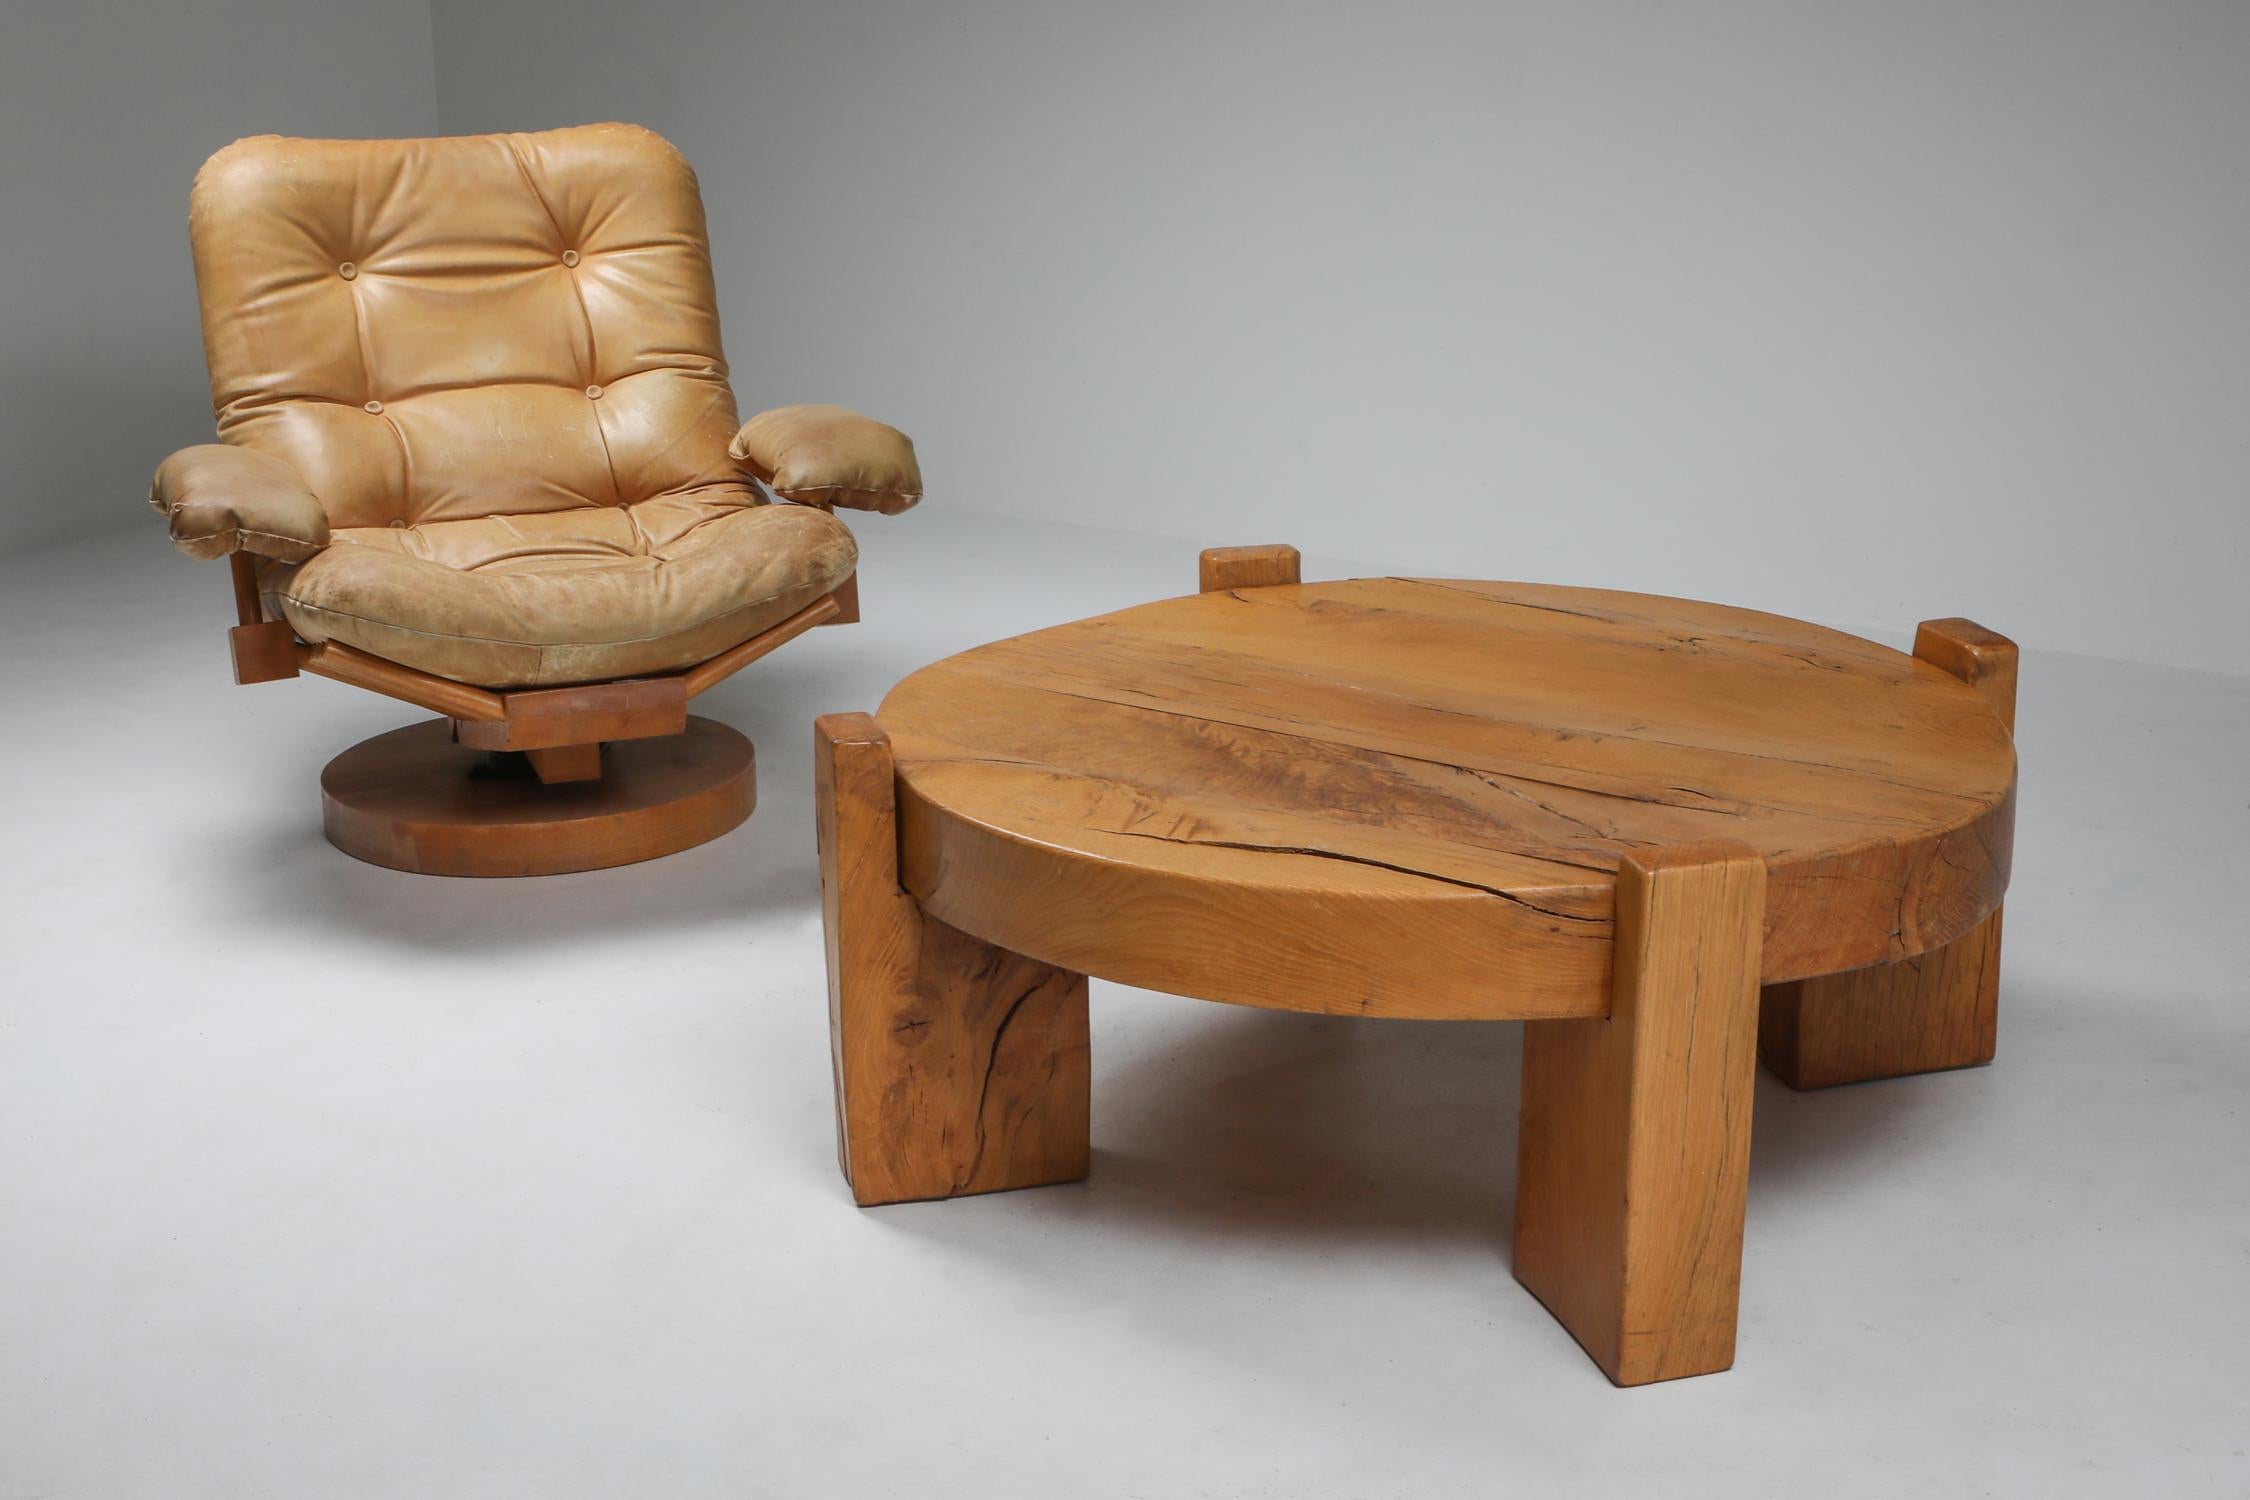 20th Century Solid Oak Round Coffee Table